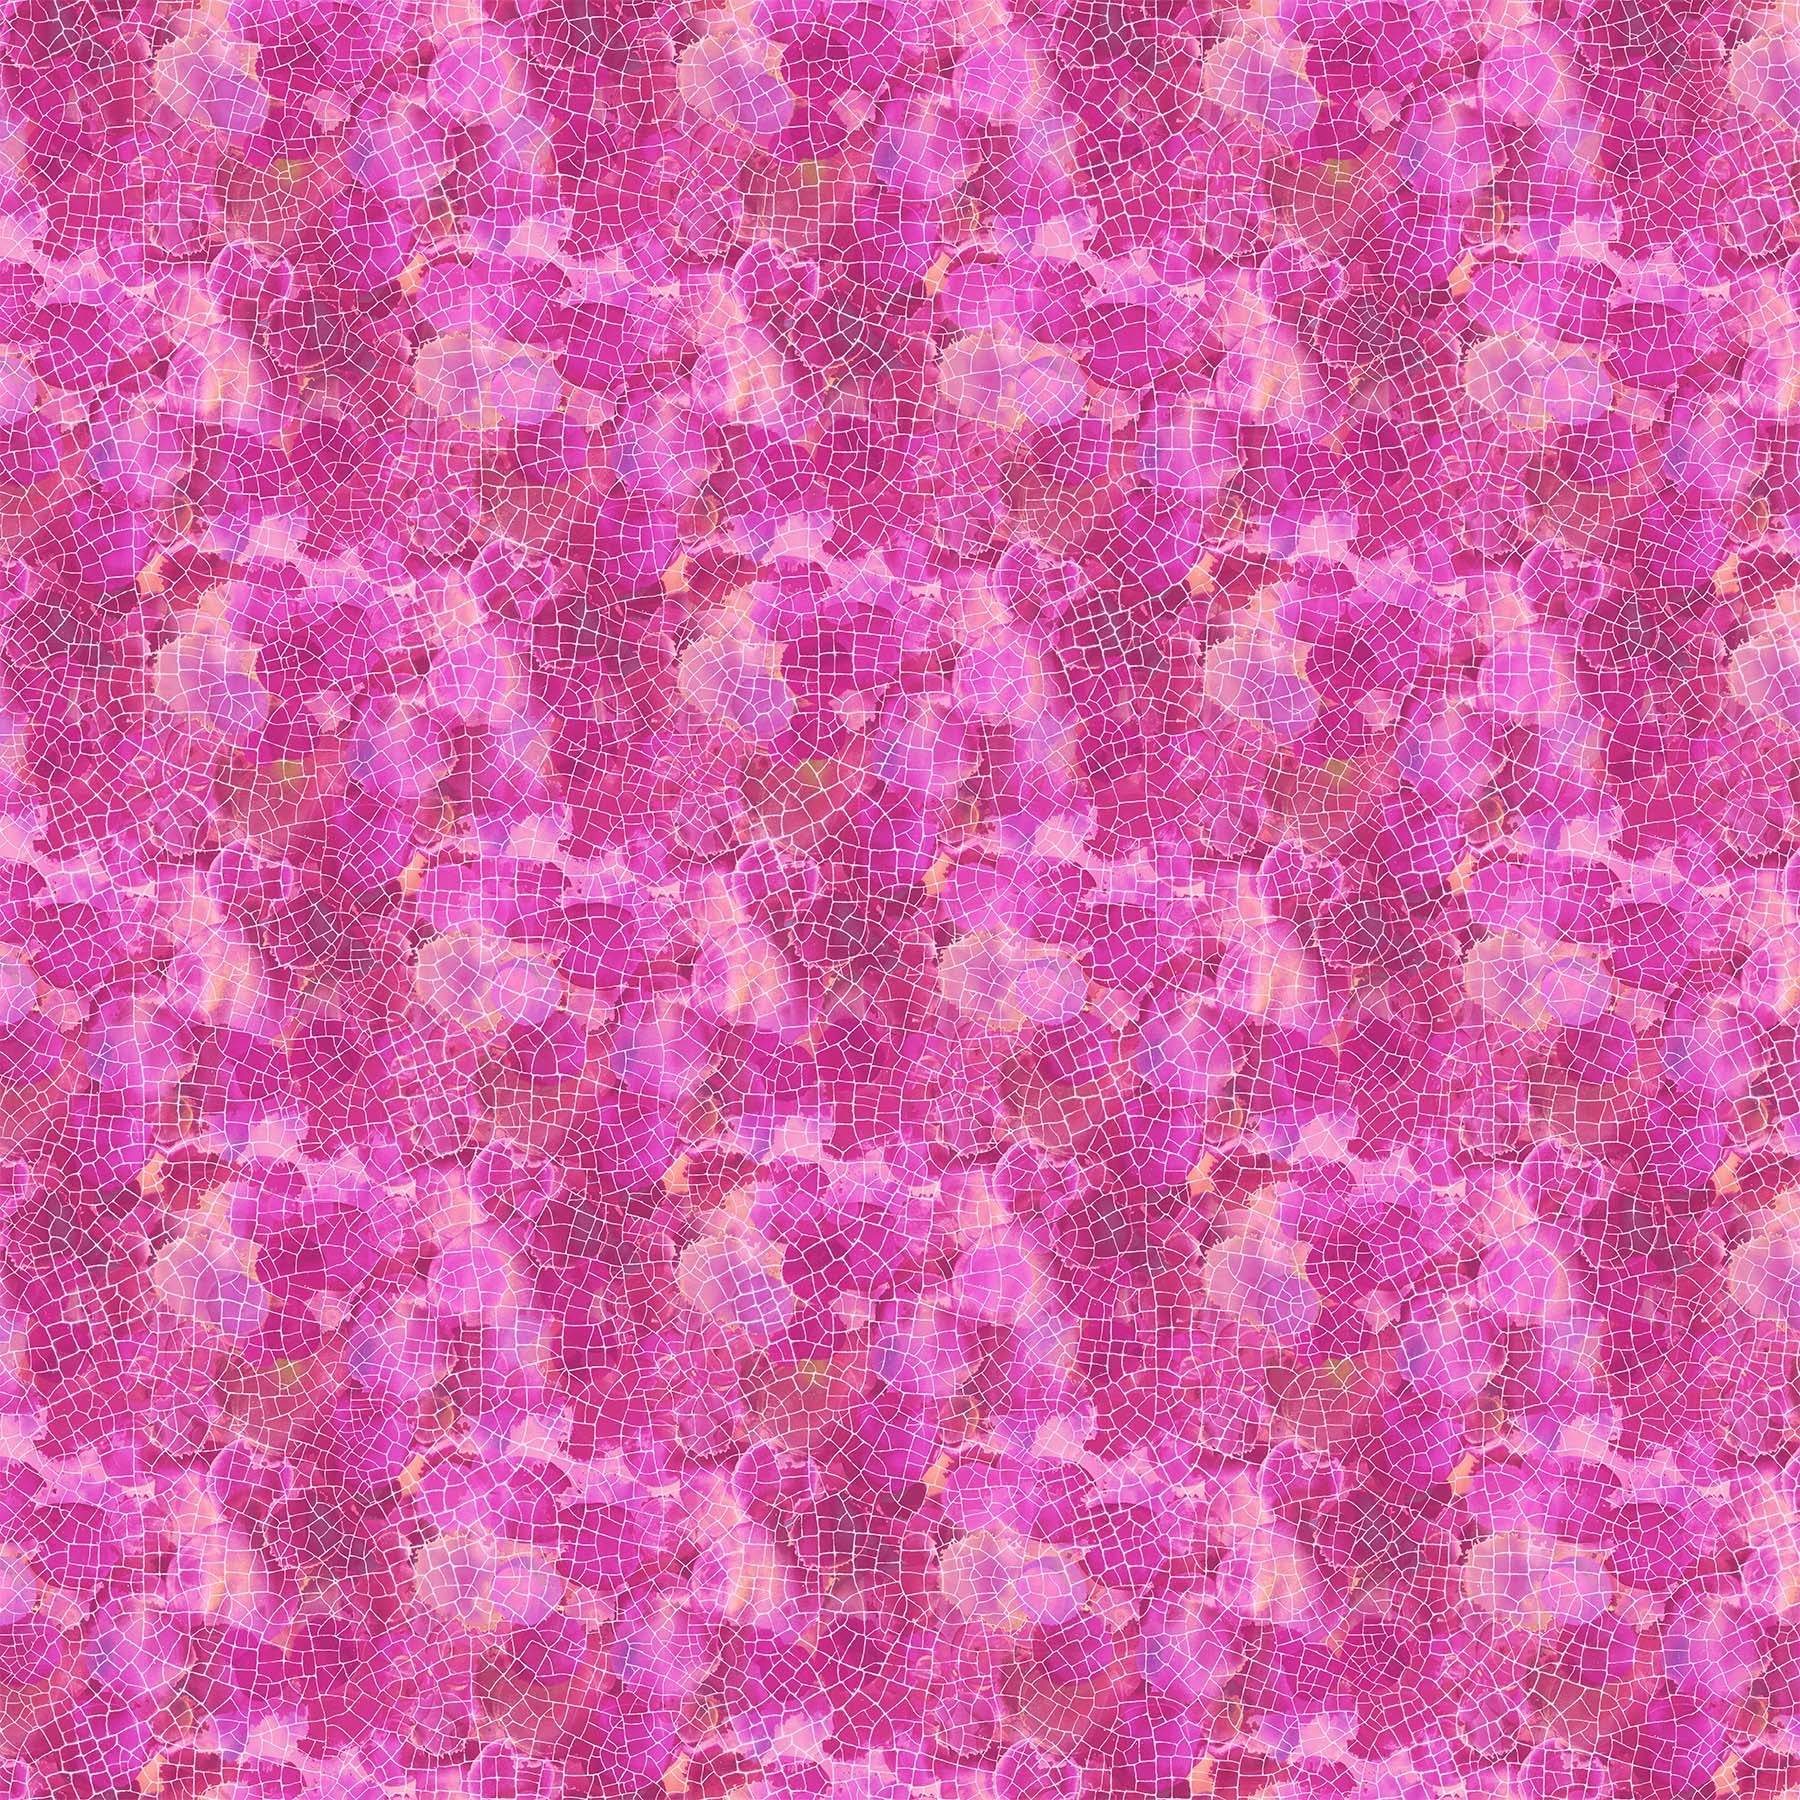 Dragonfly Dreams Quilt Fabric - Crackle Texture in Pink/Multi - DP24834-28